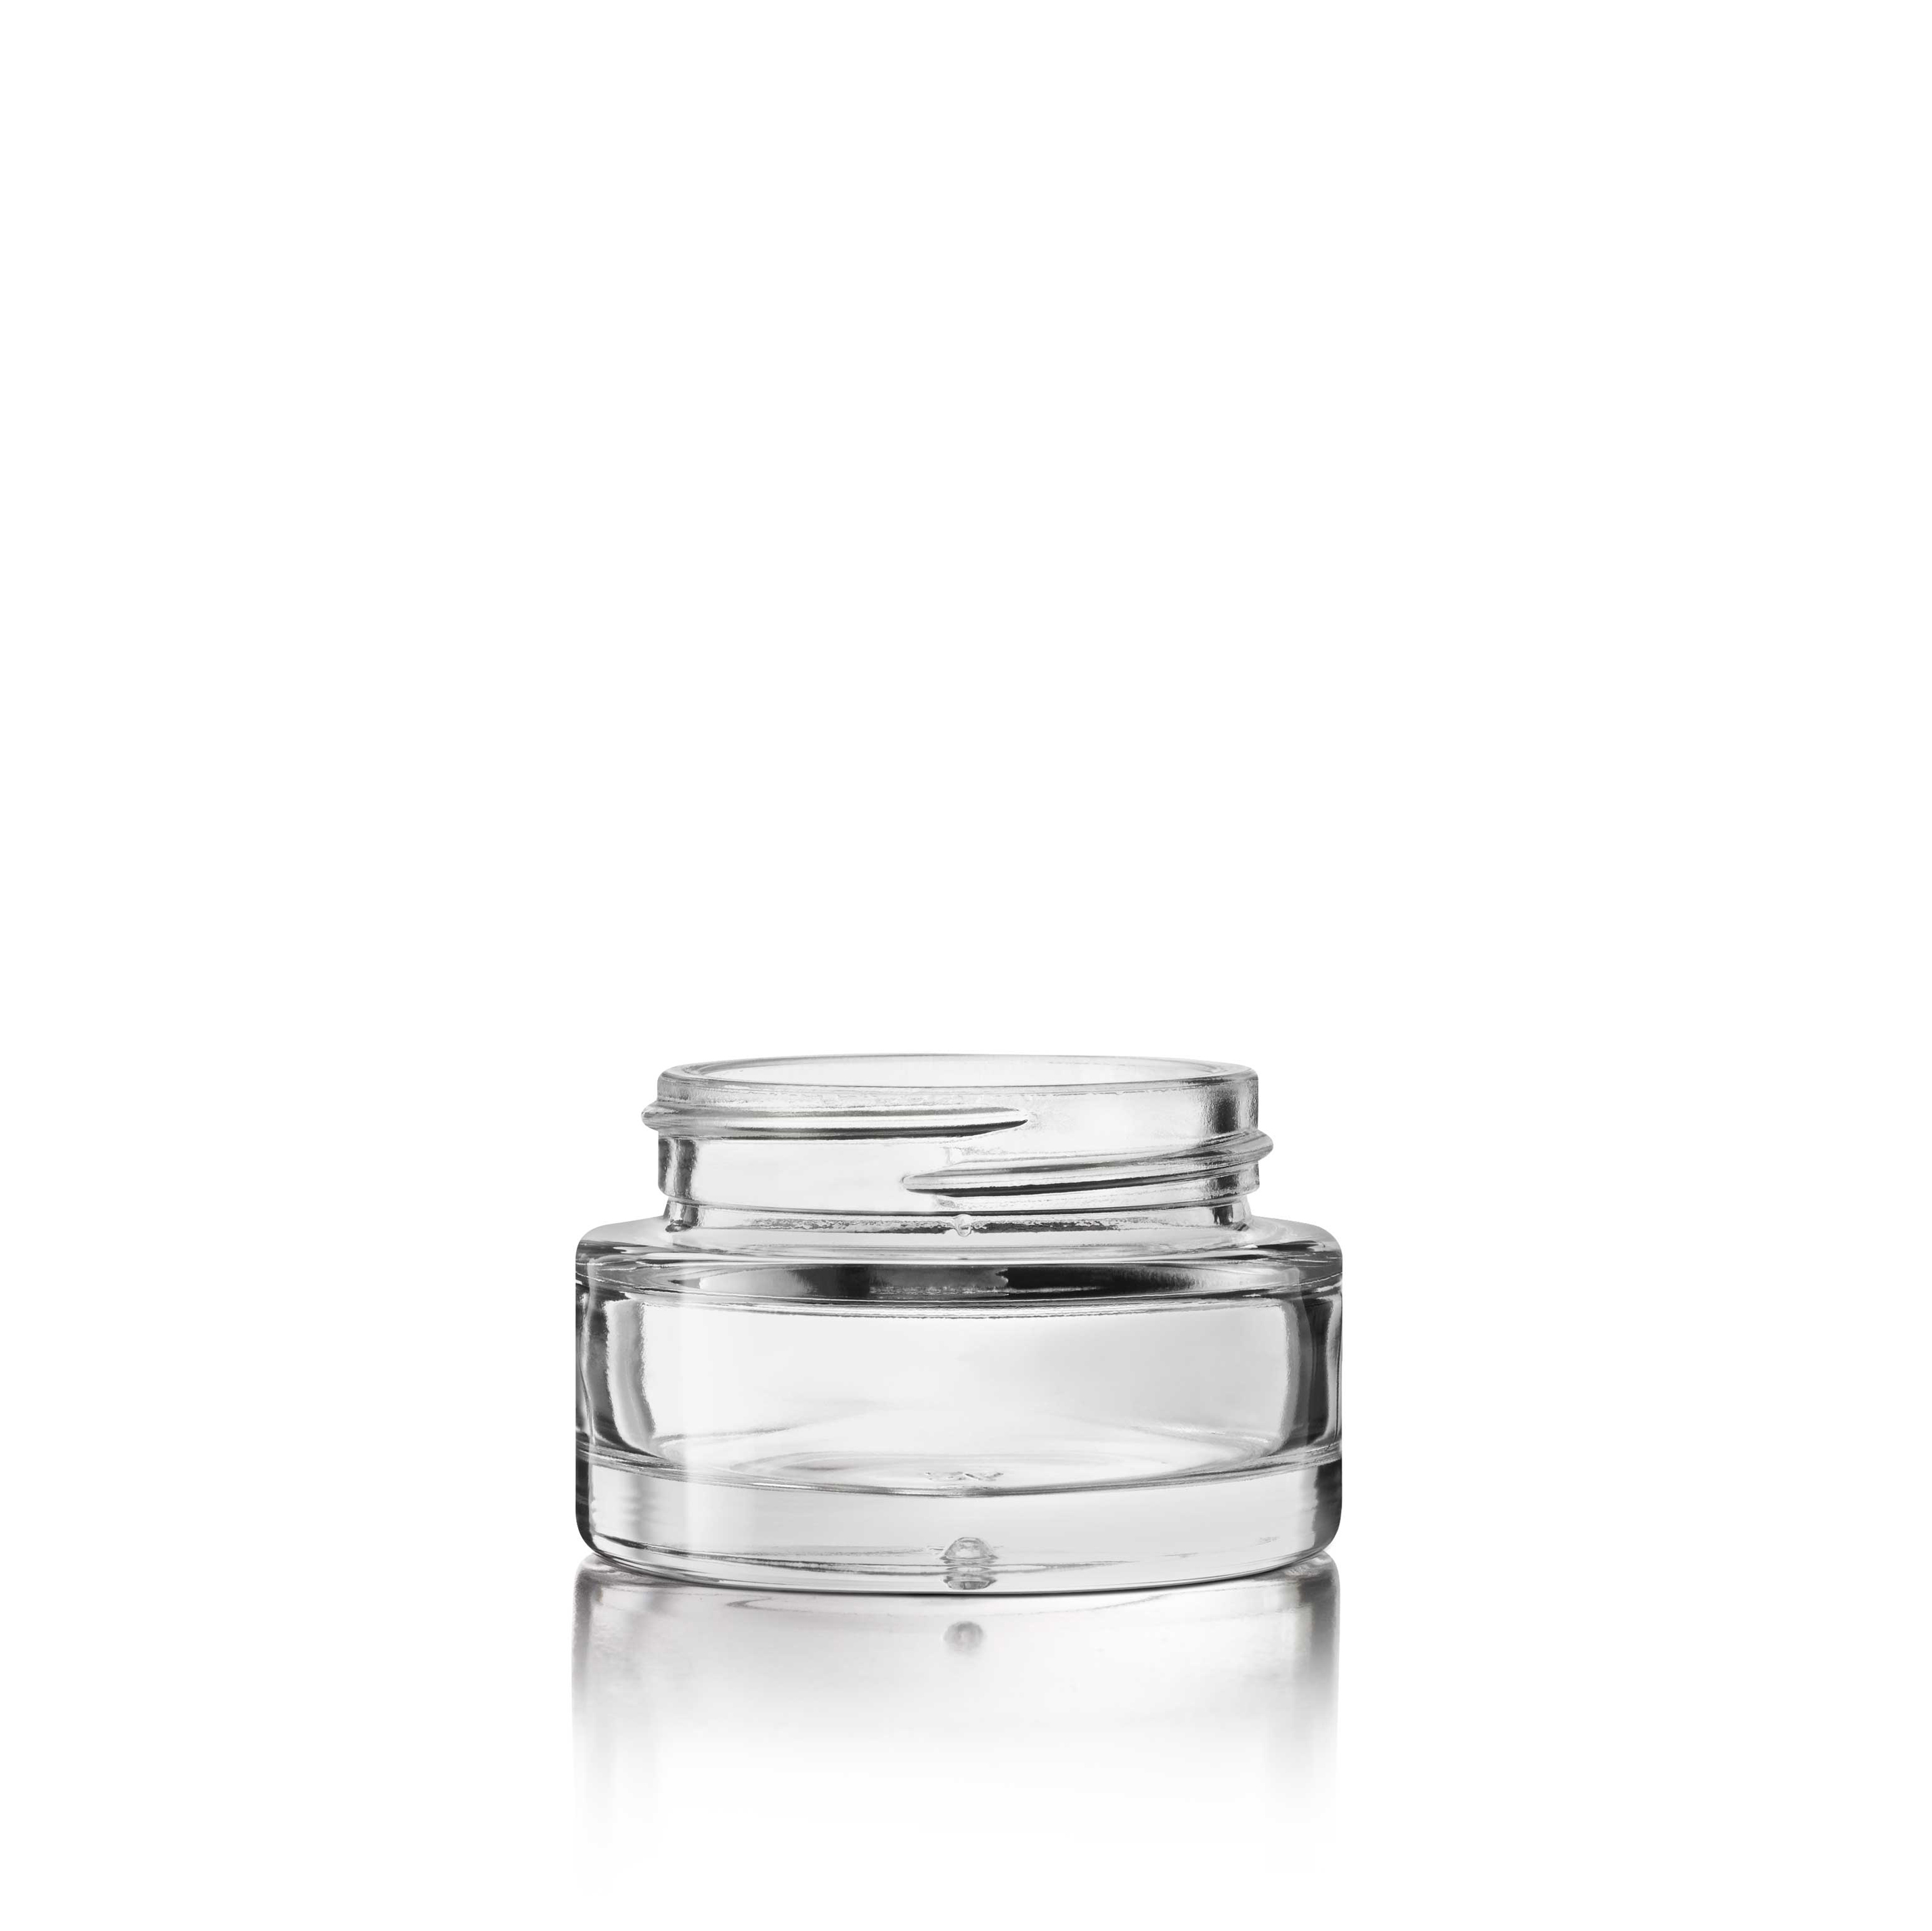 Cosmetic jar Camellia 30 ml, 46 special thread, fit for child-resistant lid, Flint